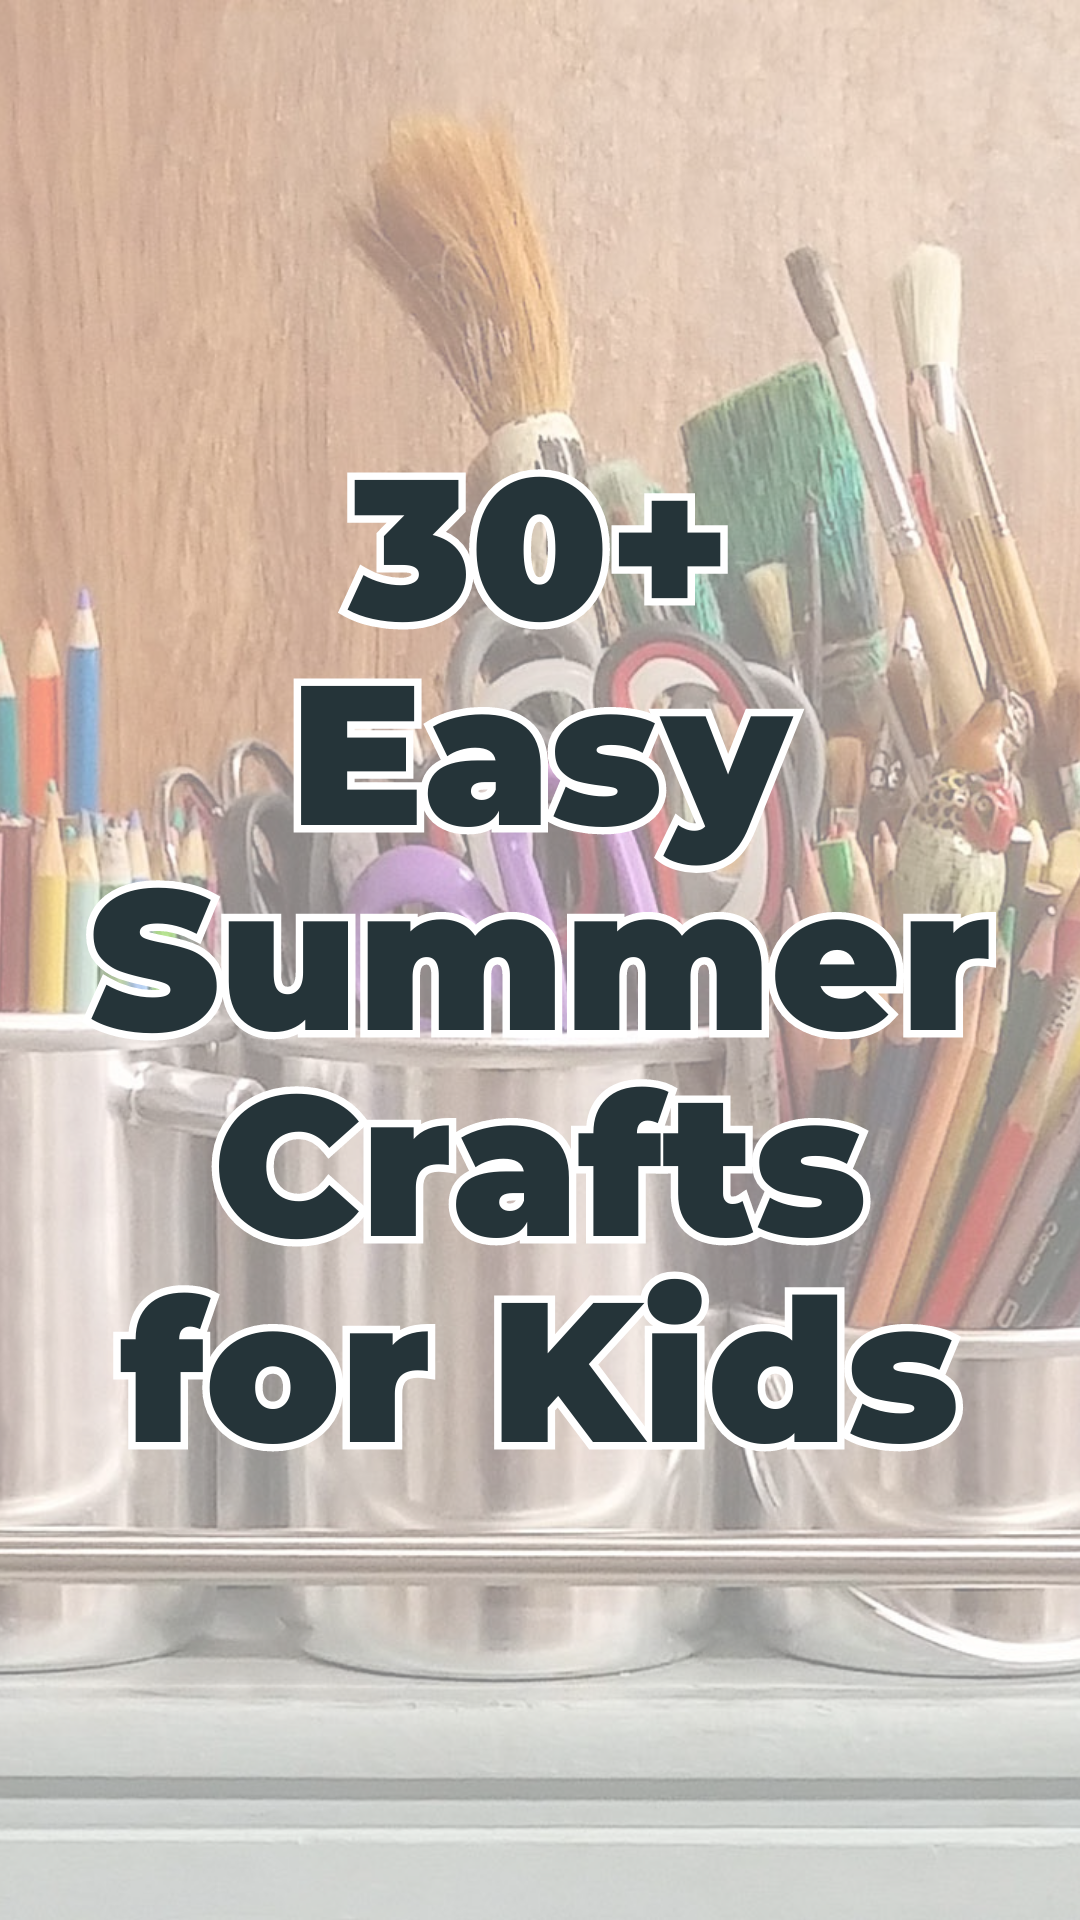 I sought out 30+ easy summer crafts for kids to keep those little hands busy. Ages from toddlers to preschoolers, and even tweens and adults!